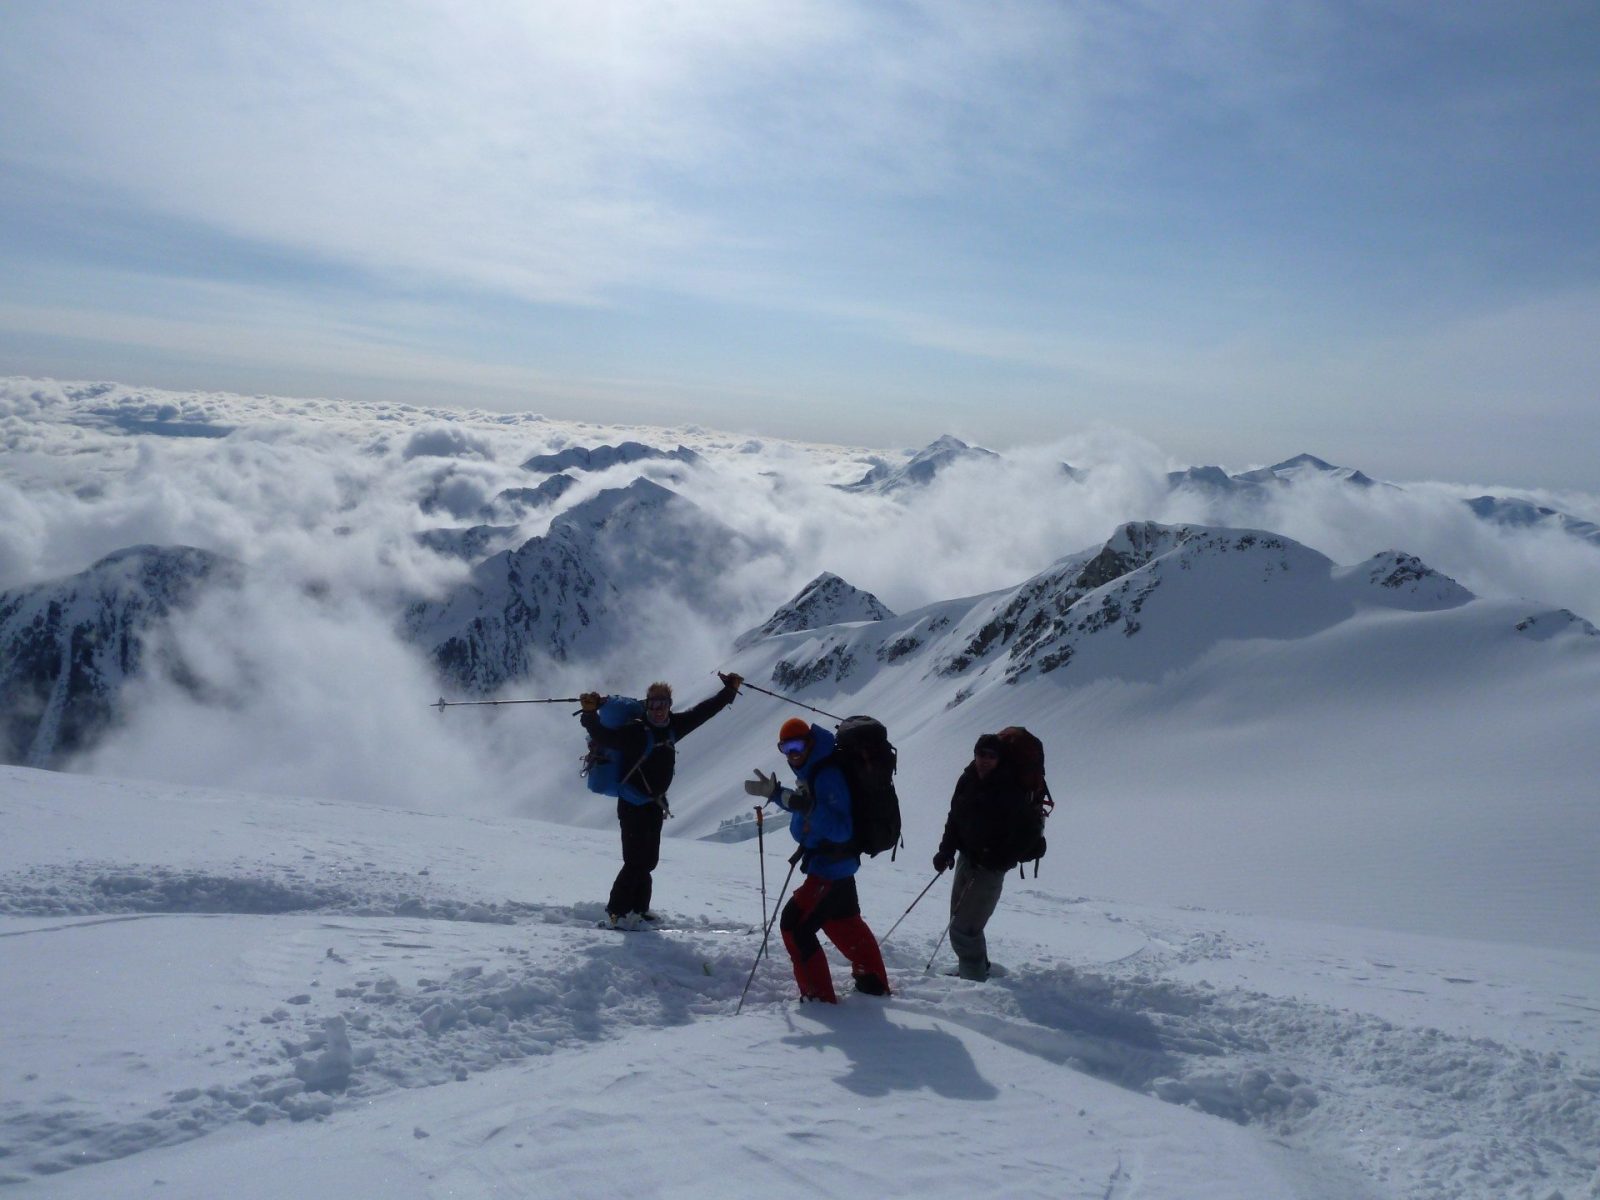 Touring above the clouds with Extremely Canadian Backcountry Tours.